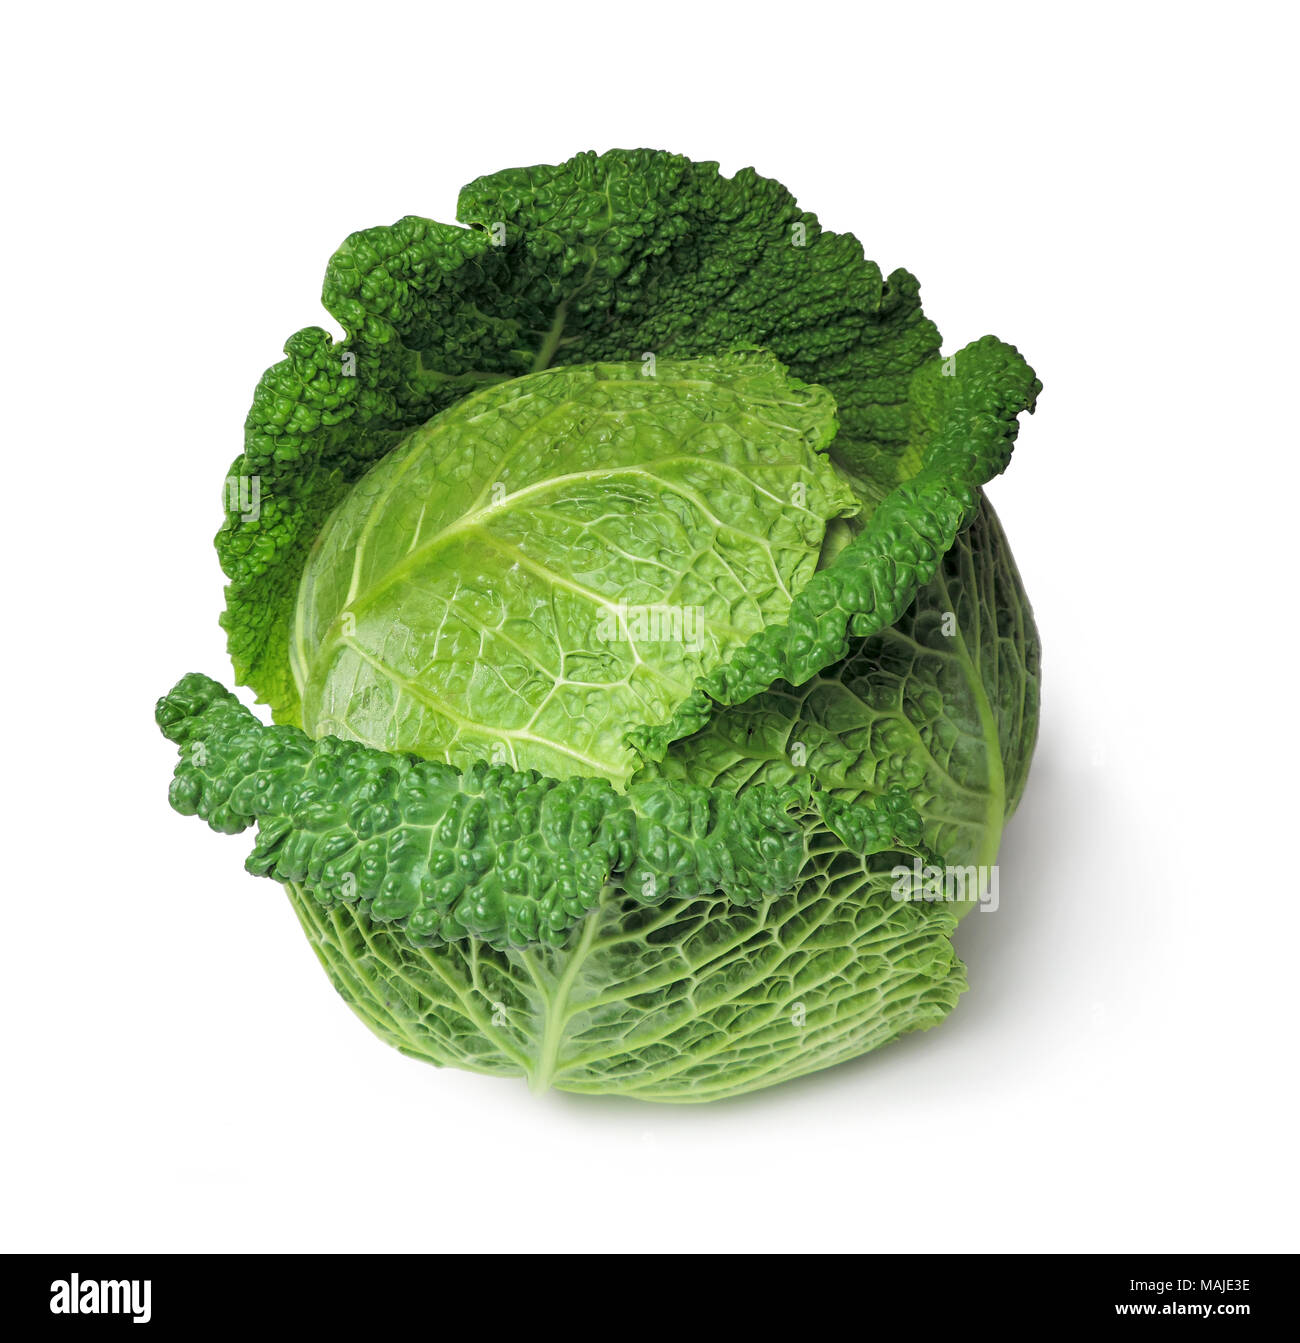 Raw savoy cabbage, isolated on white background. Whole, ripe cabbage, dieting vegetable, healthy eating. Stock Photo